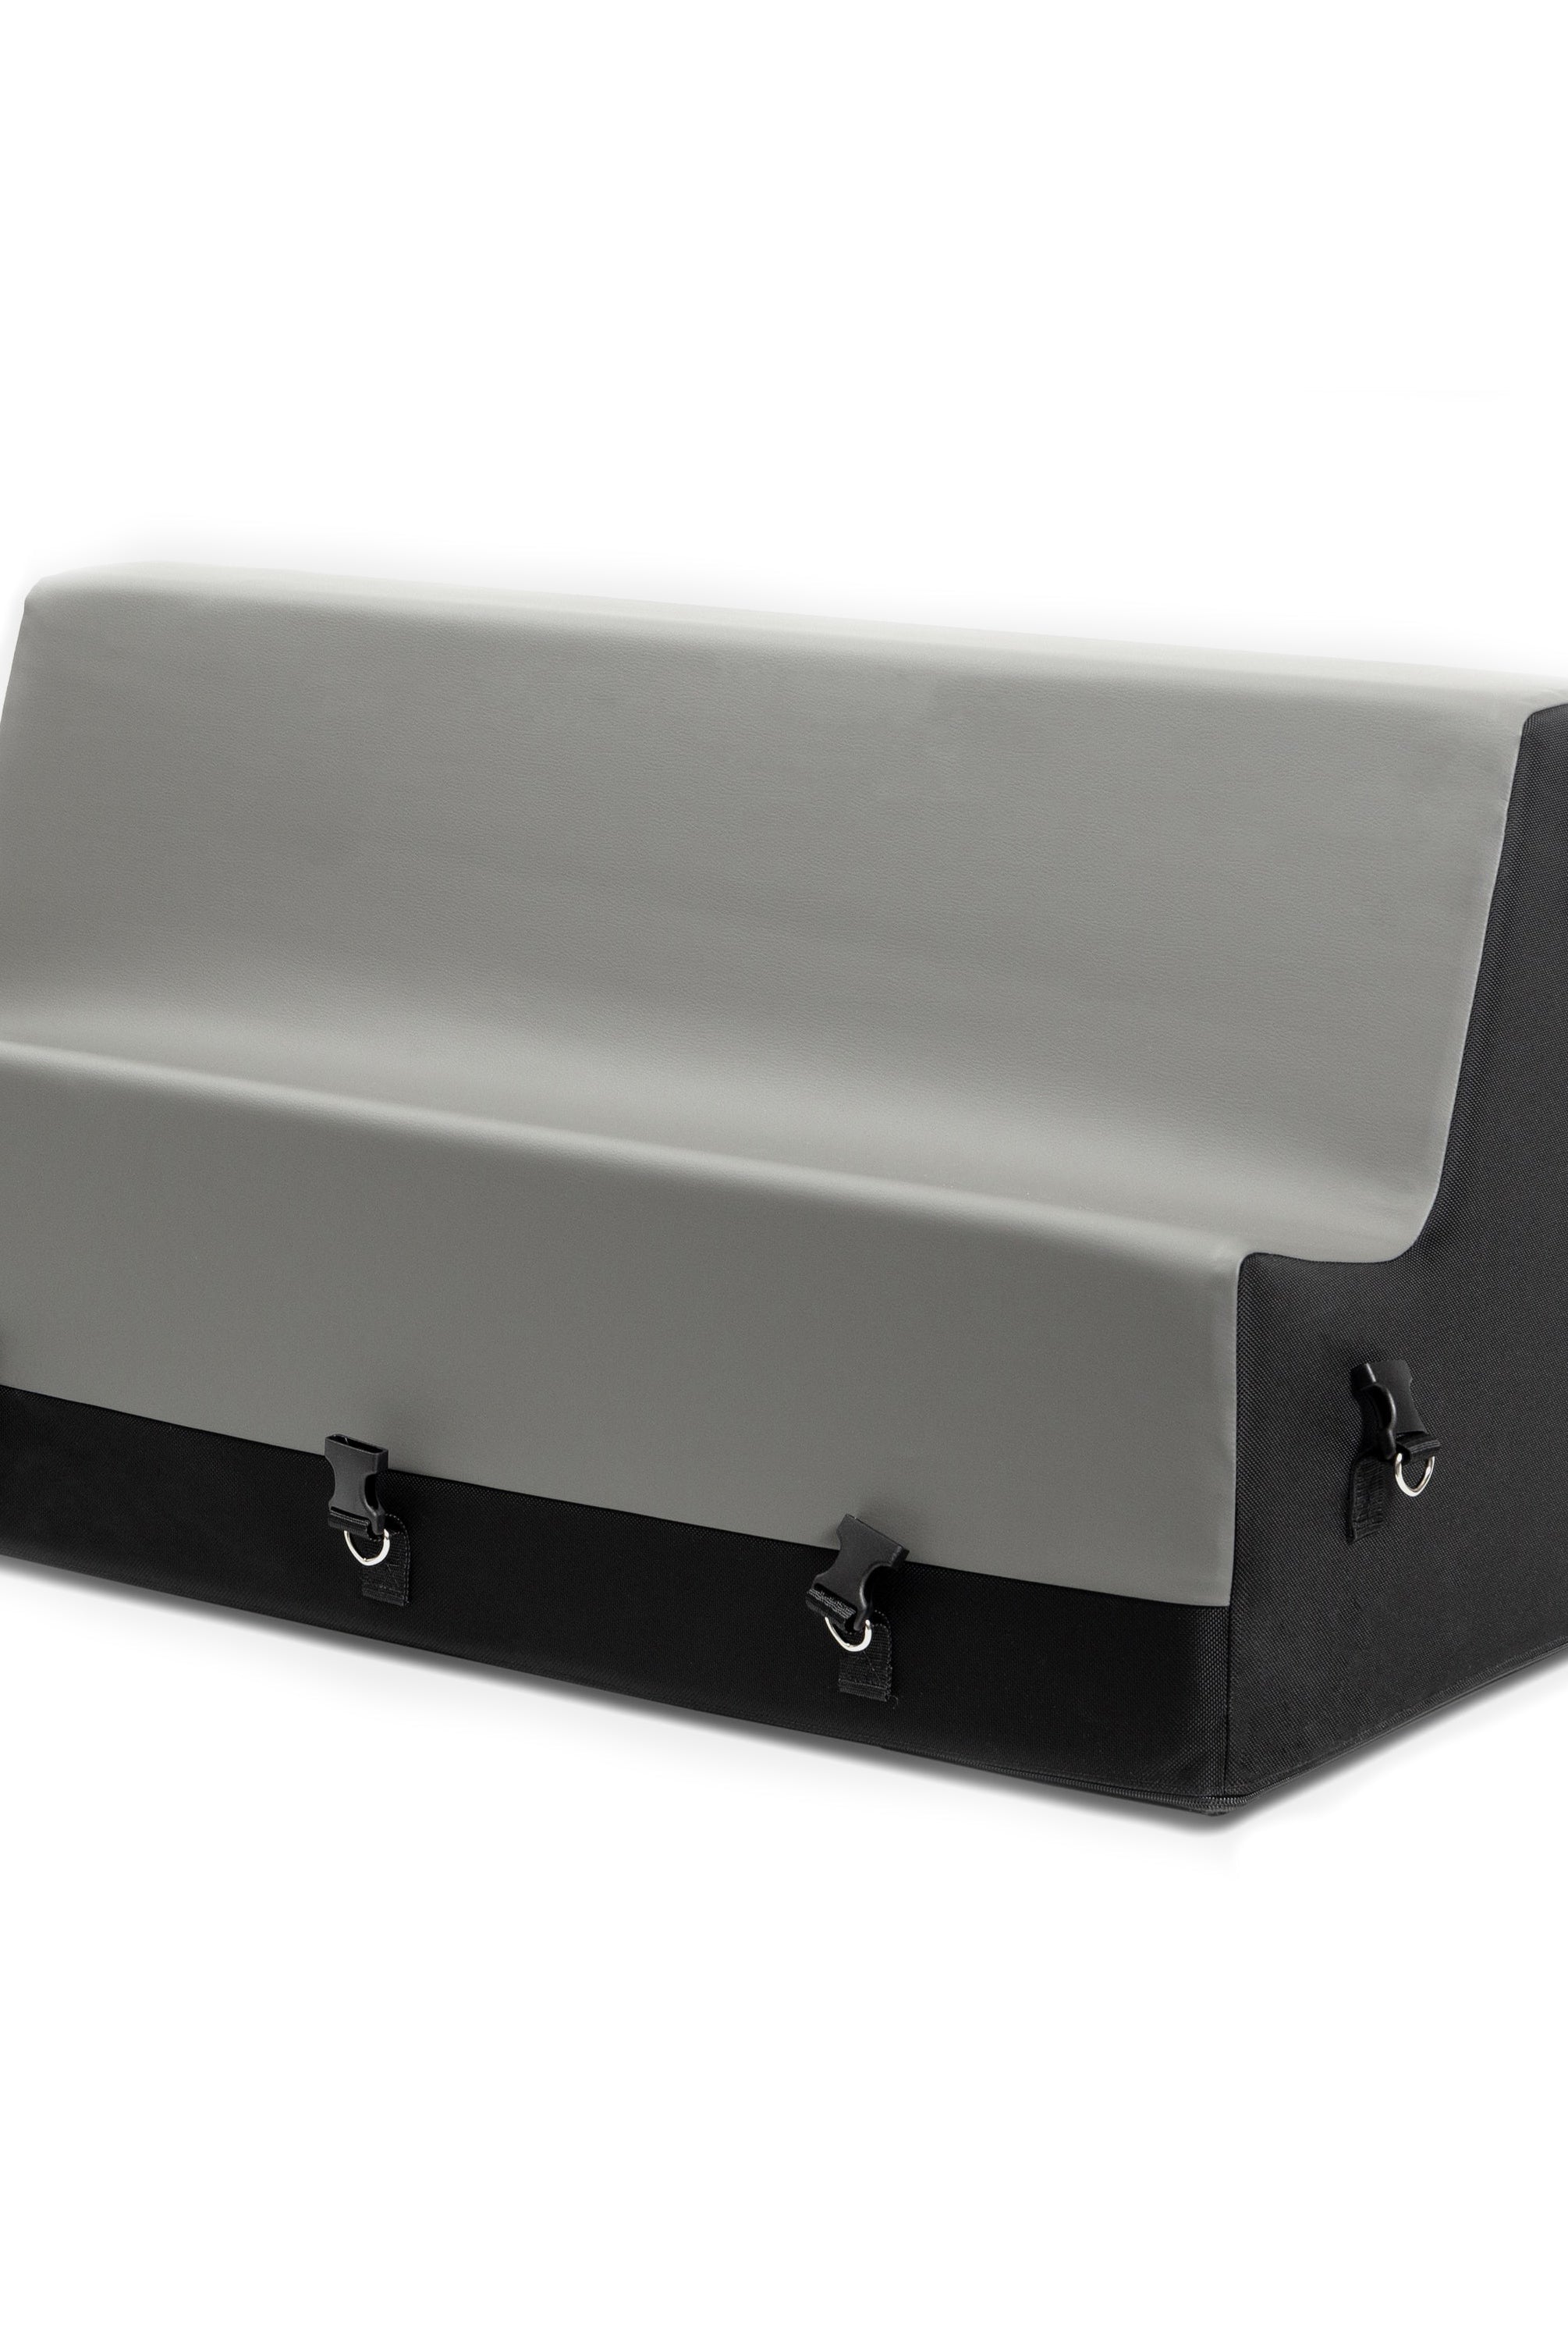 Steed Spanking Bench Charcoal - ACME Pleasure